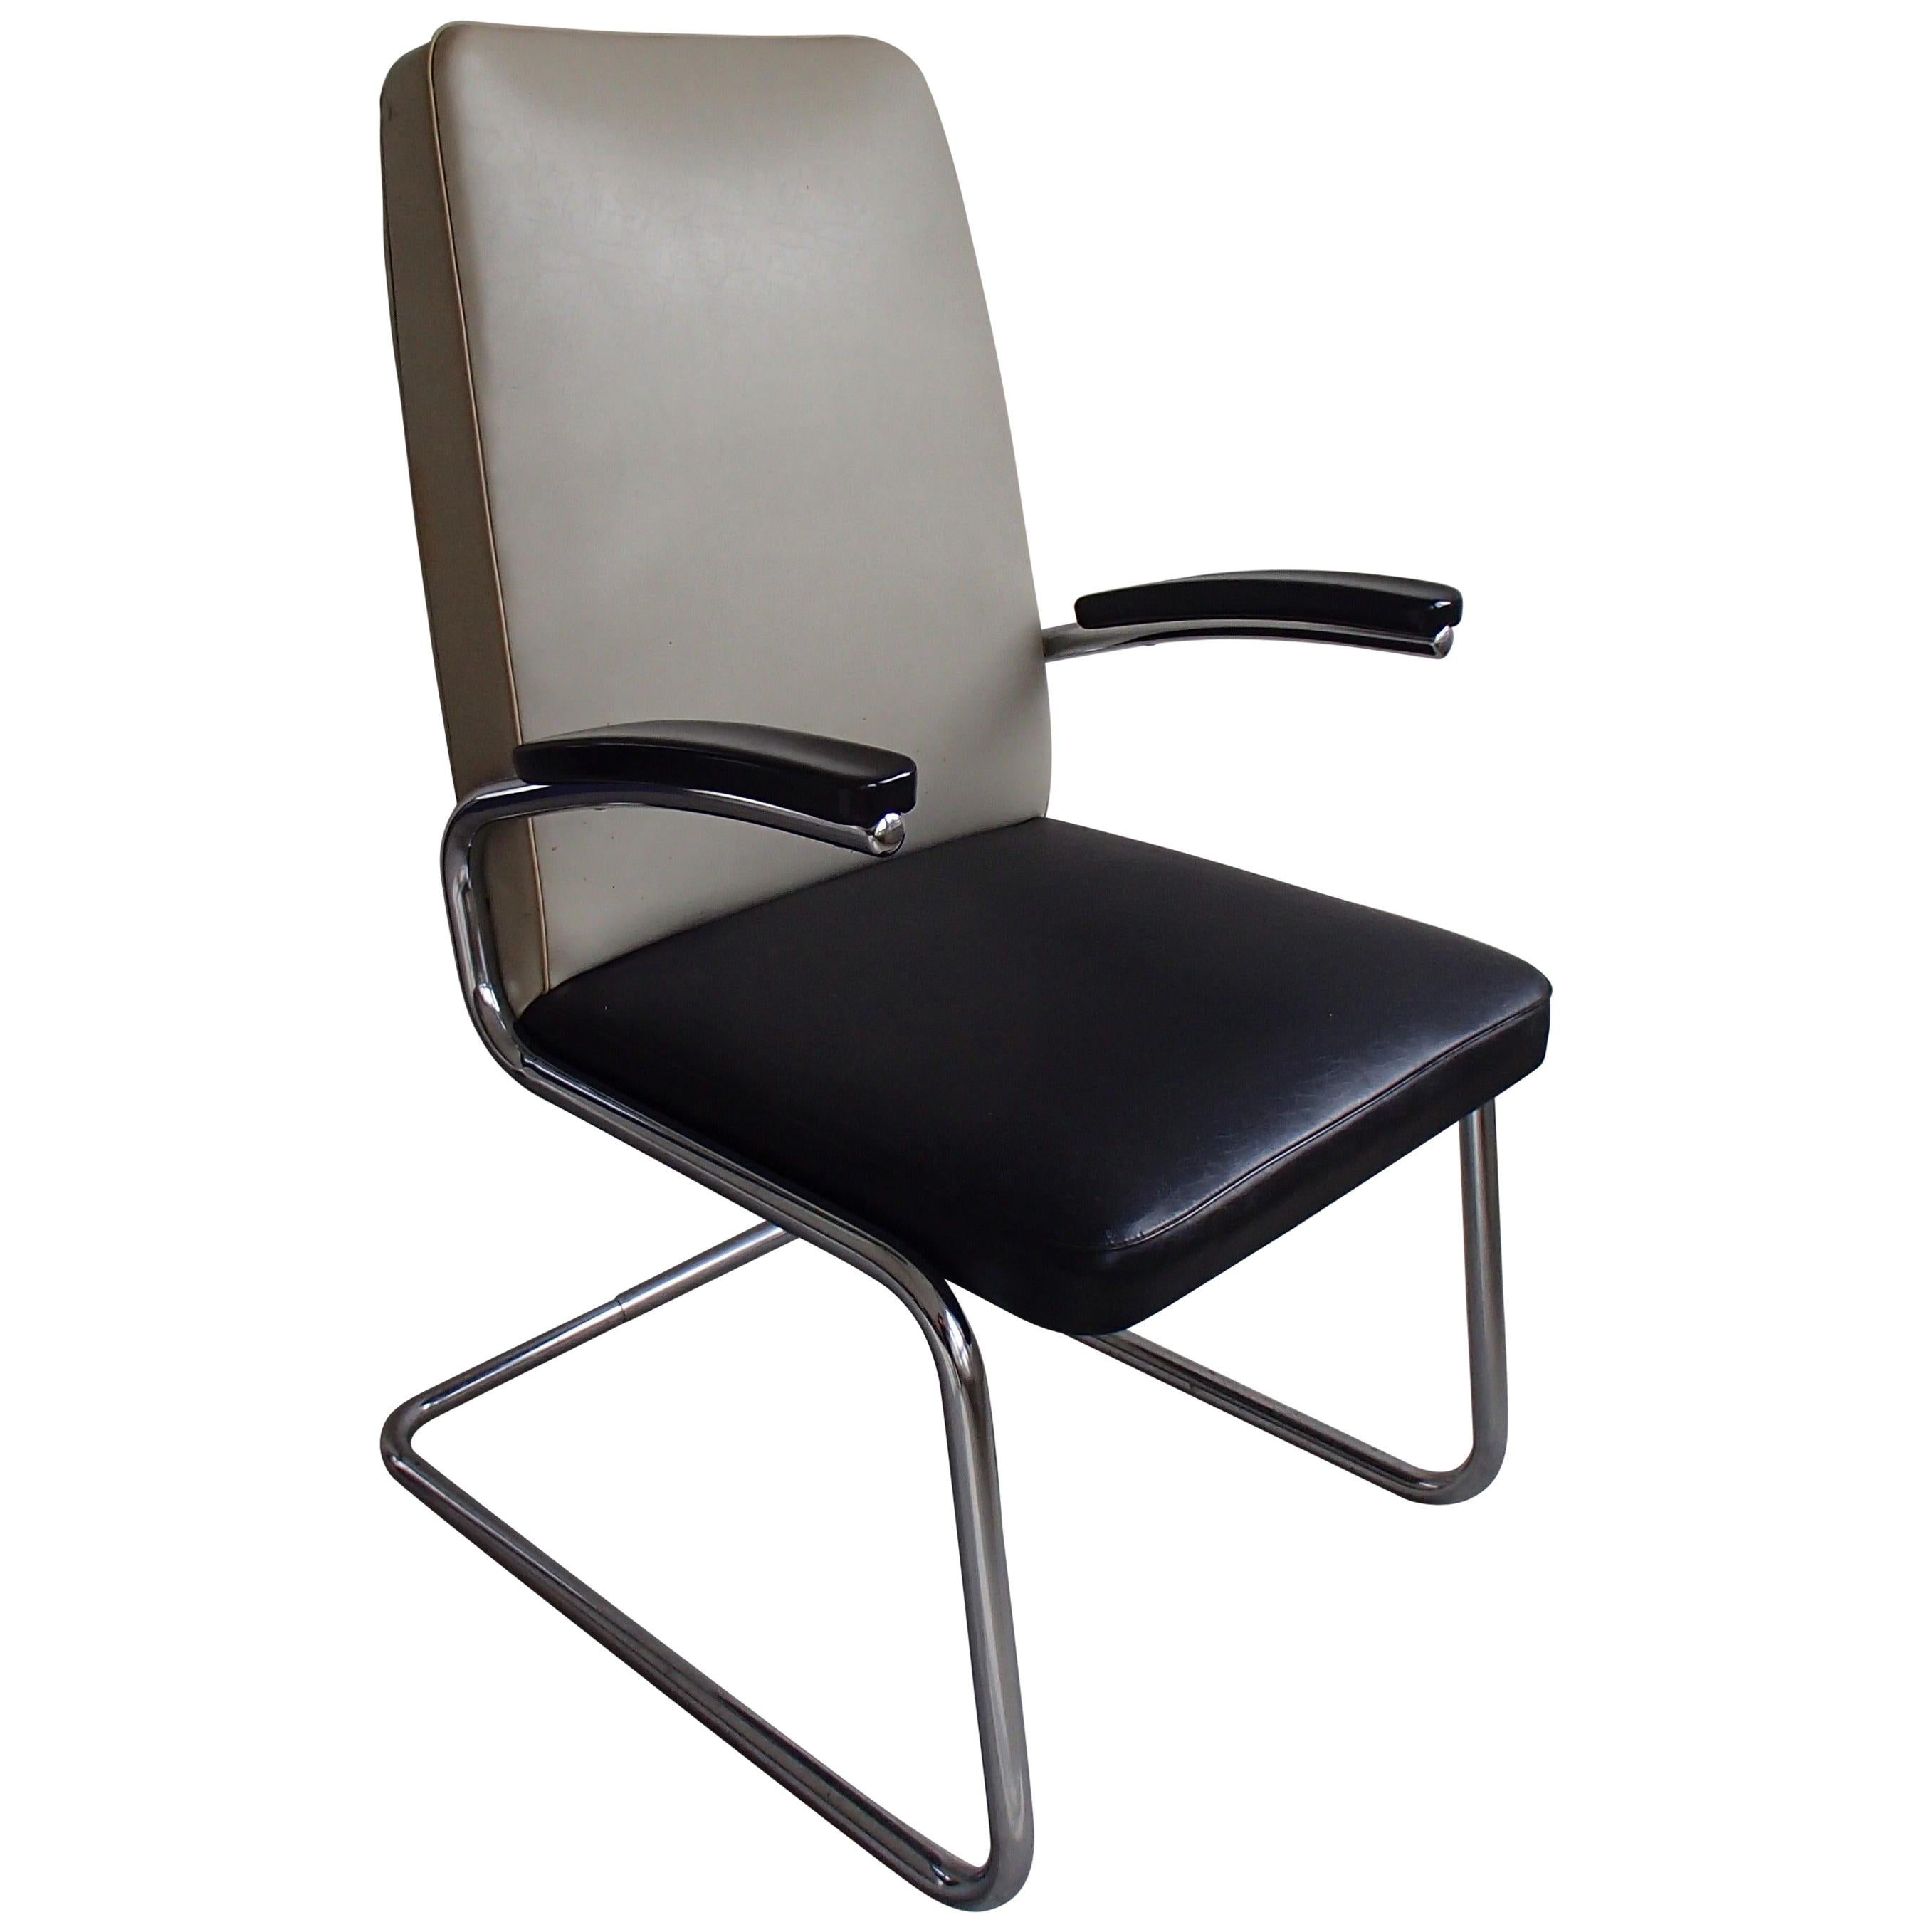 Midcentury Mauser Armchair with Original Leatherette Grey and Black